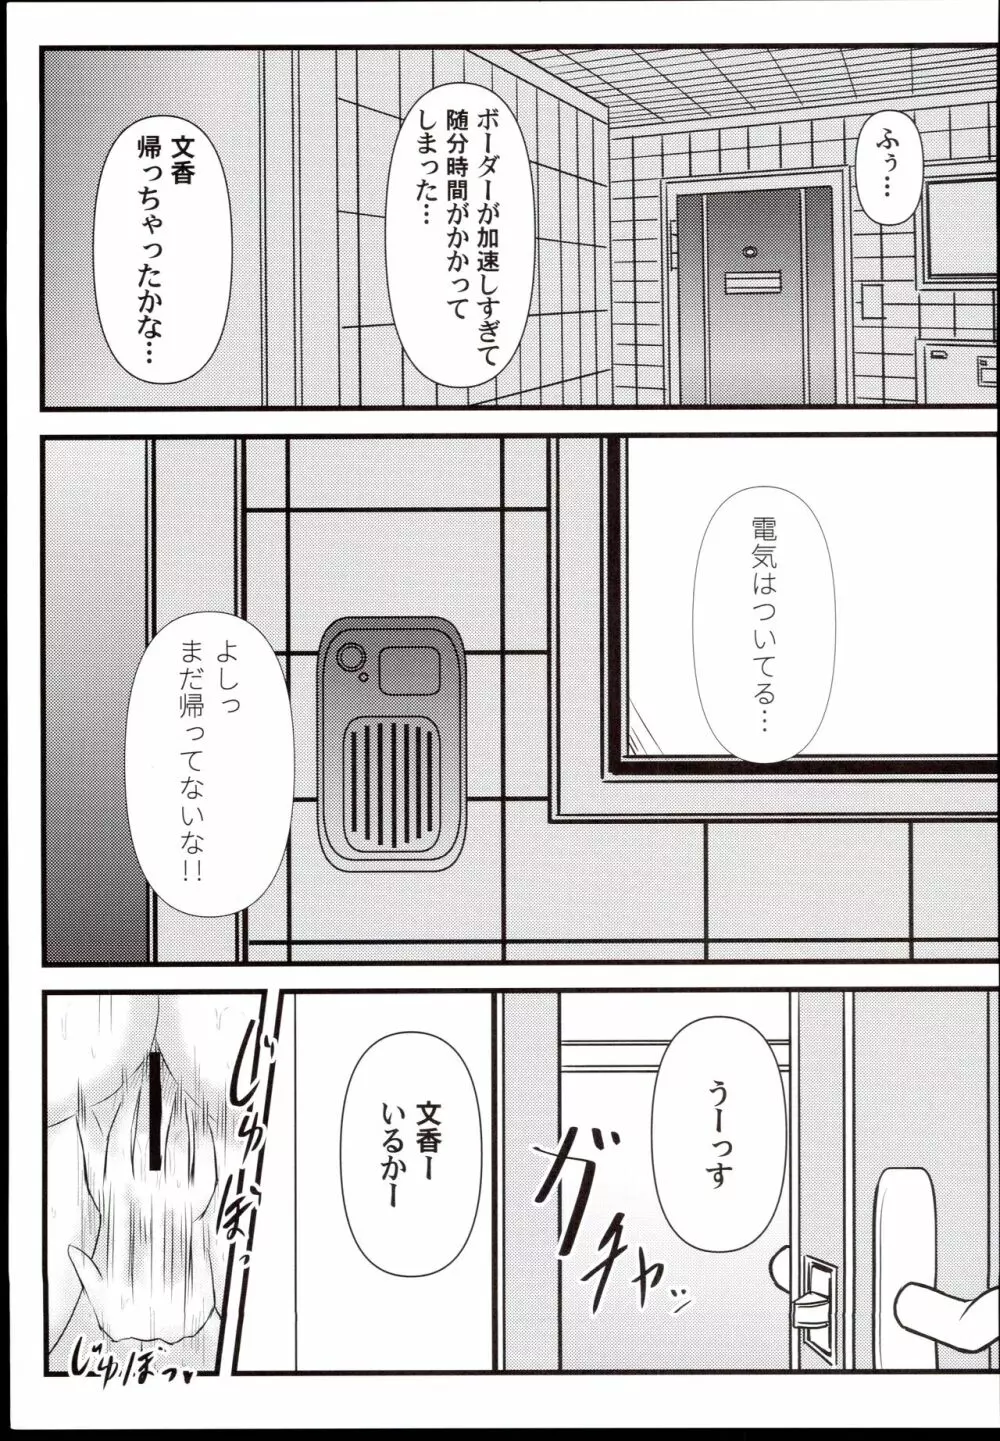 ふみふみ？ふみふみ。ふみふみ…ふみふみ!! - page7